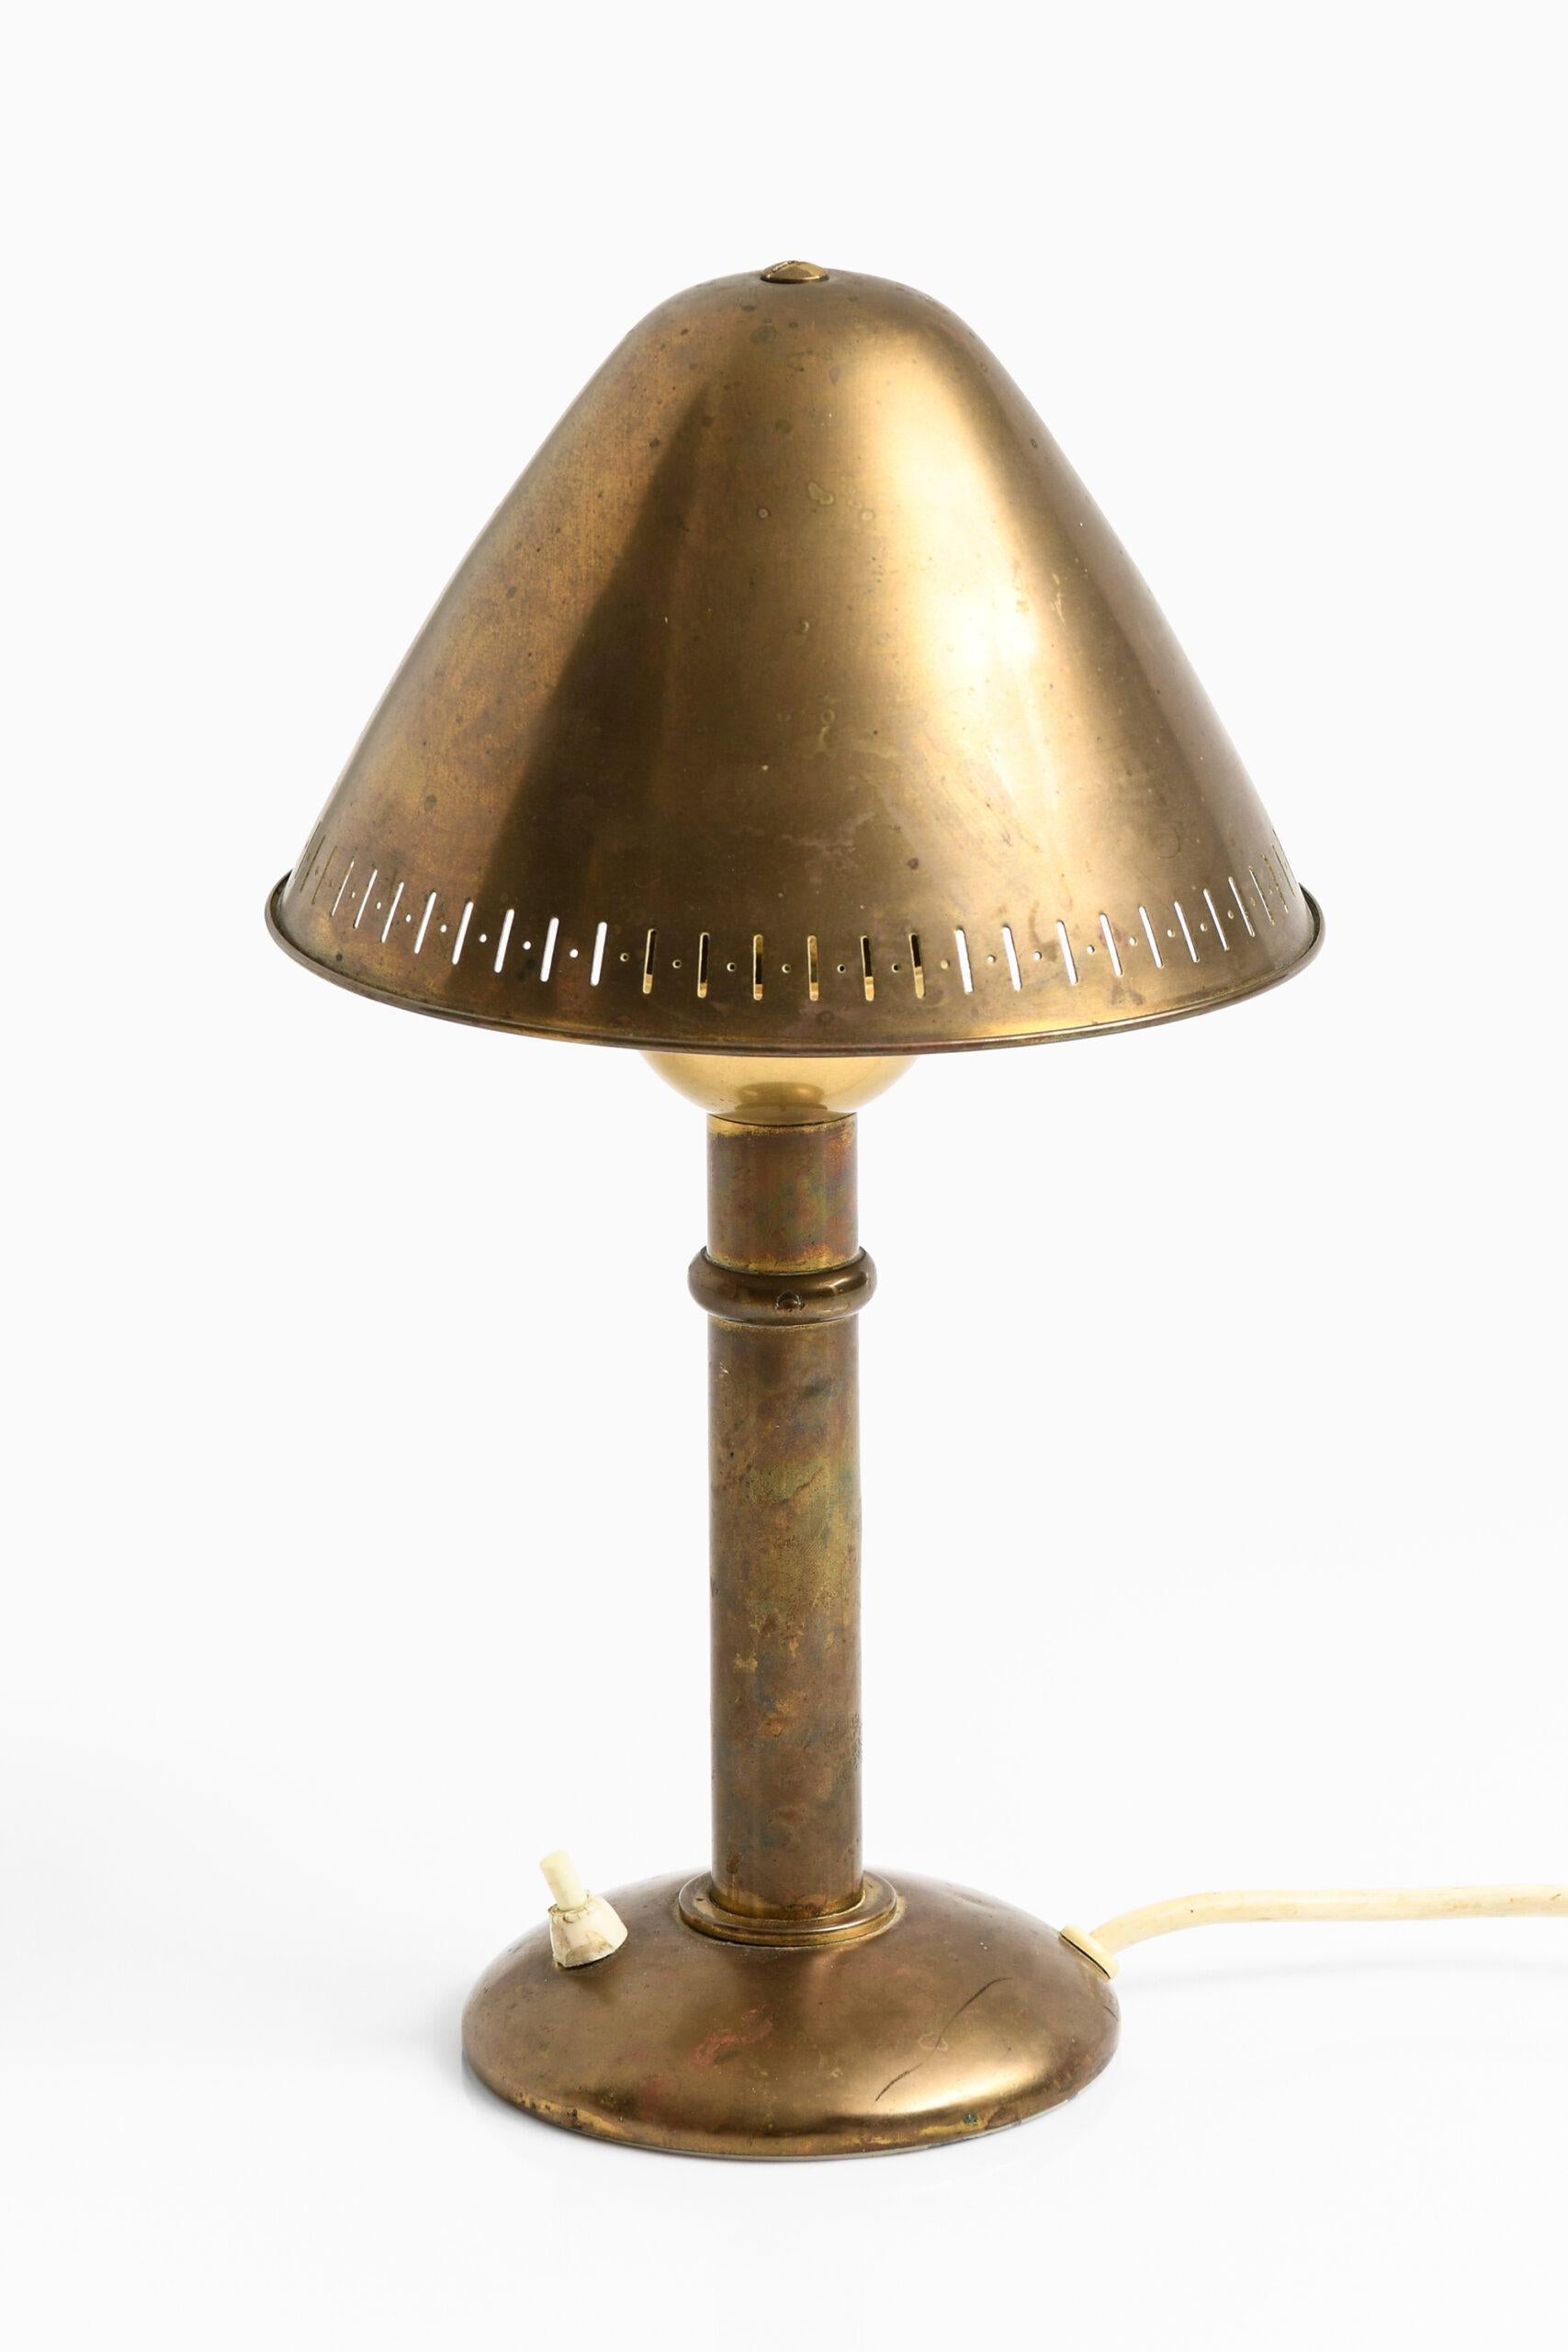 Rare table lamp with adjustable shade by unknown designer. Produced by ASEA in Sweden.